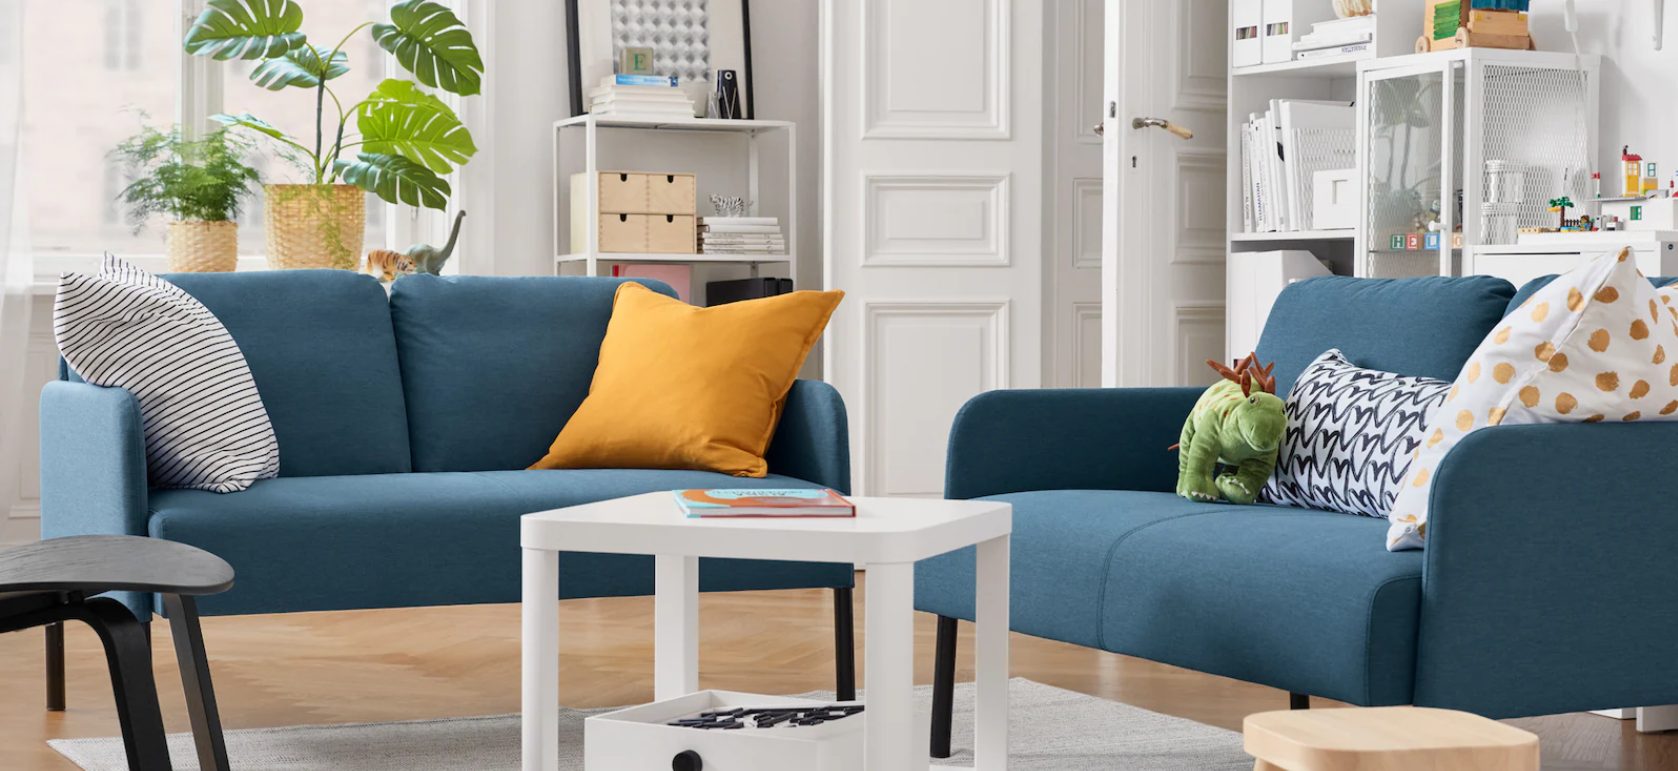 Top 5 colors we love at IKEA right now